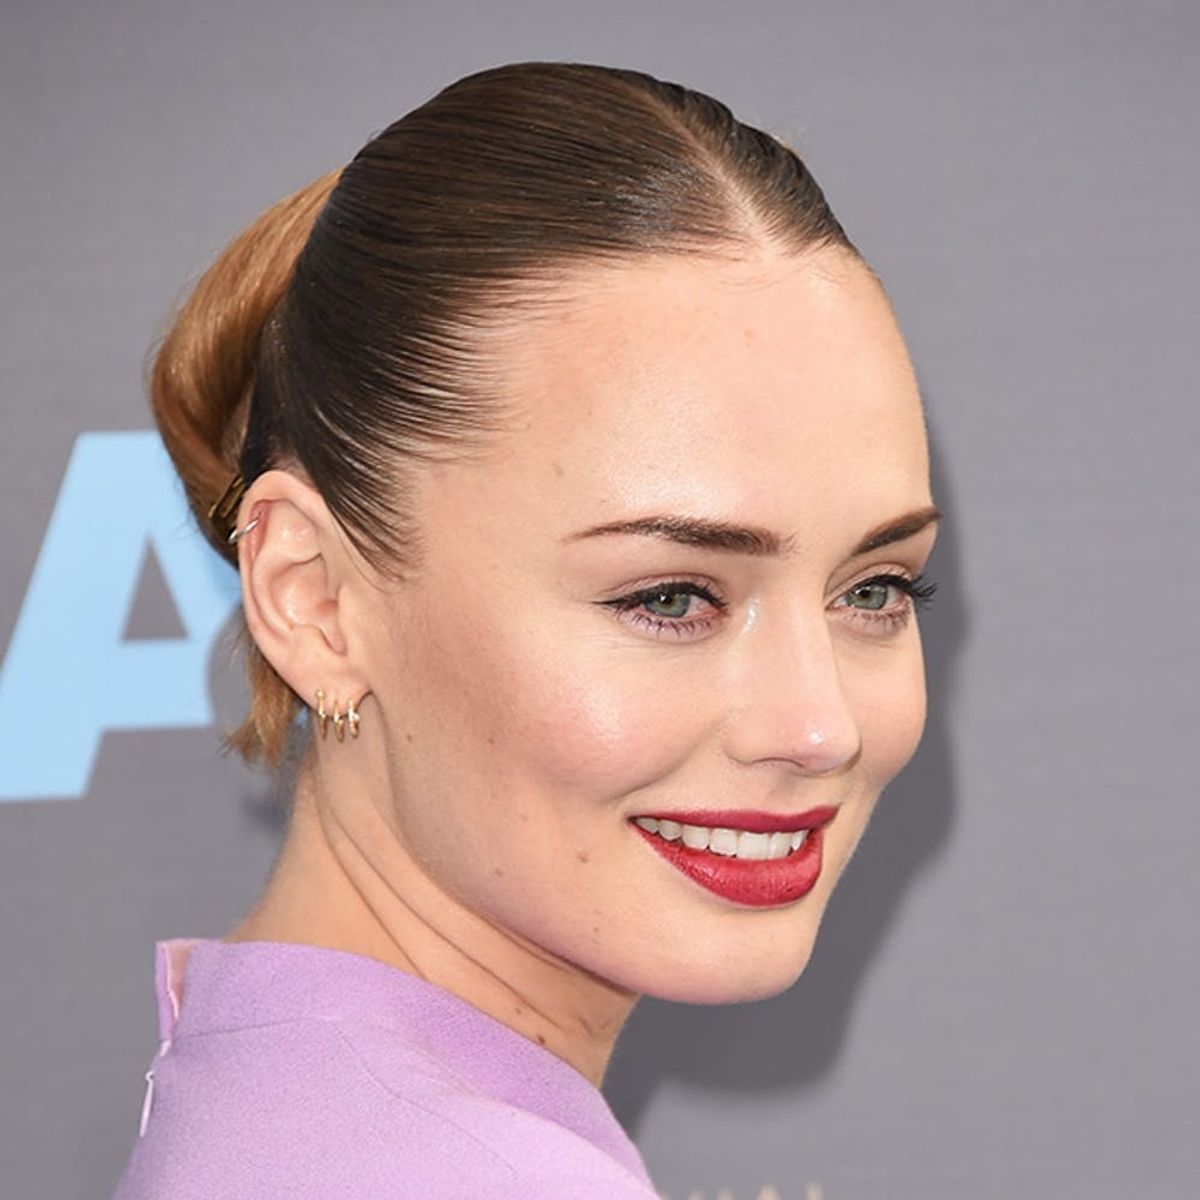 Laura Haddock’s Epic Critics’ Choice Awards Updo Used This Unexpected Hair Tool